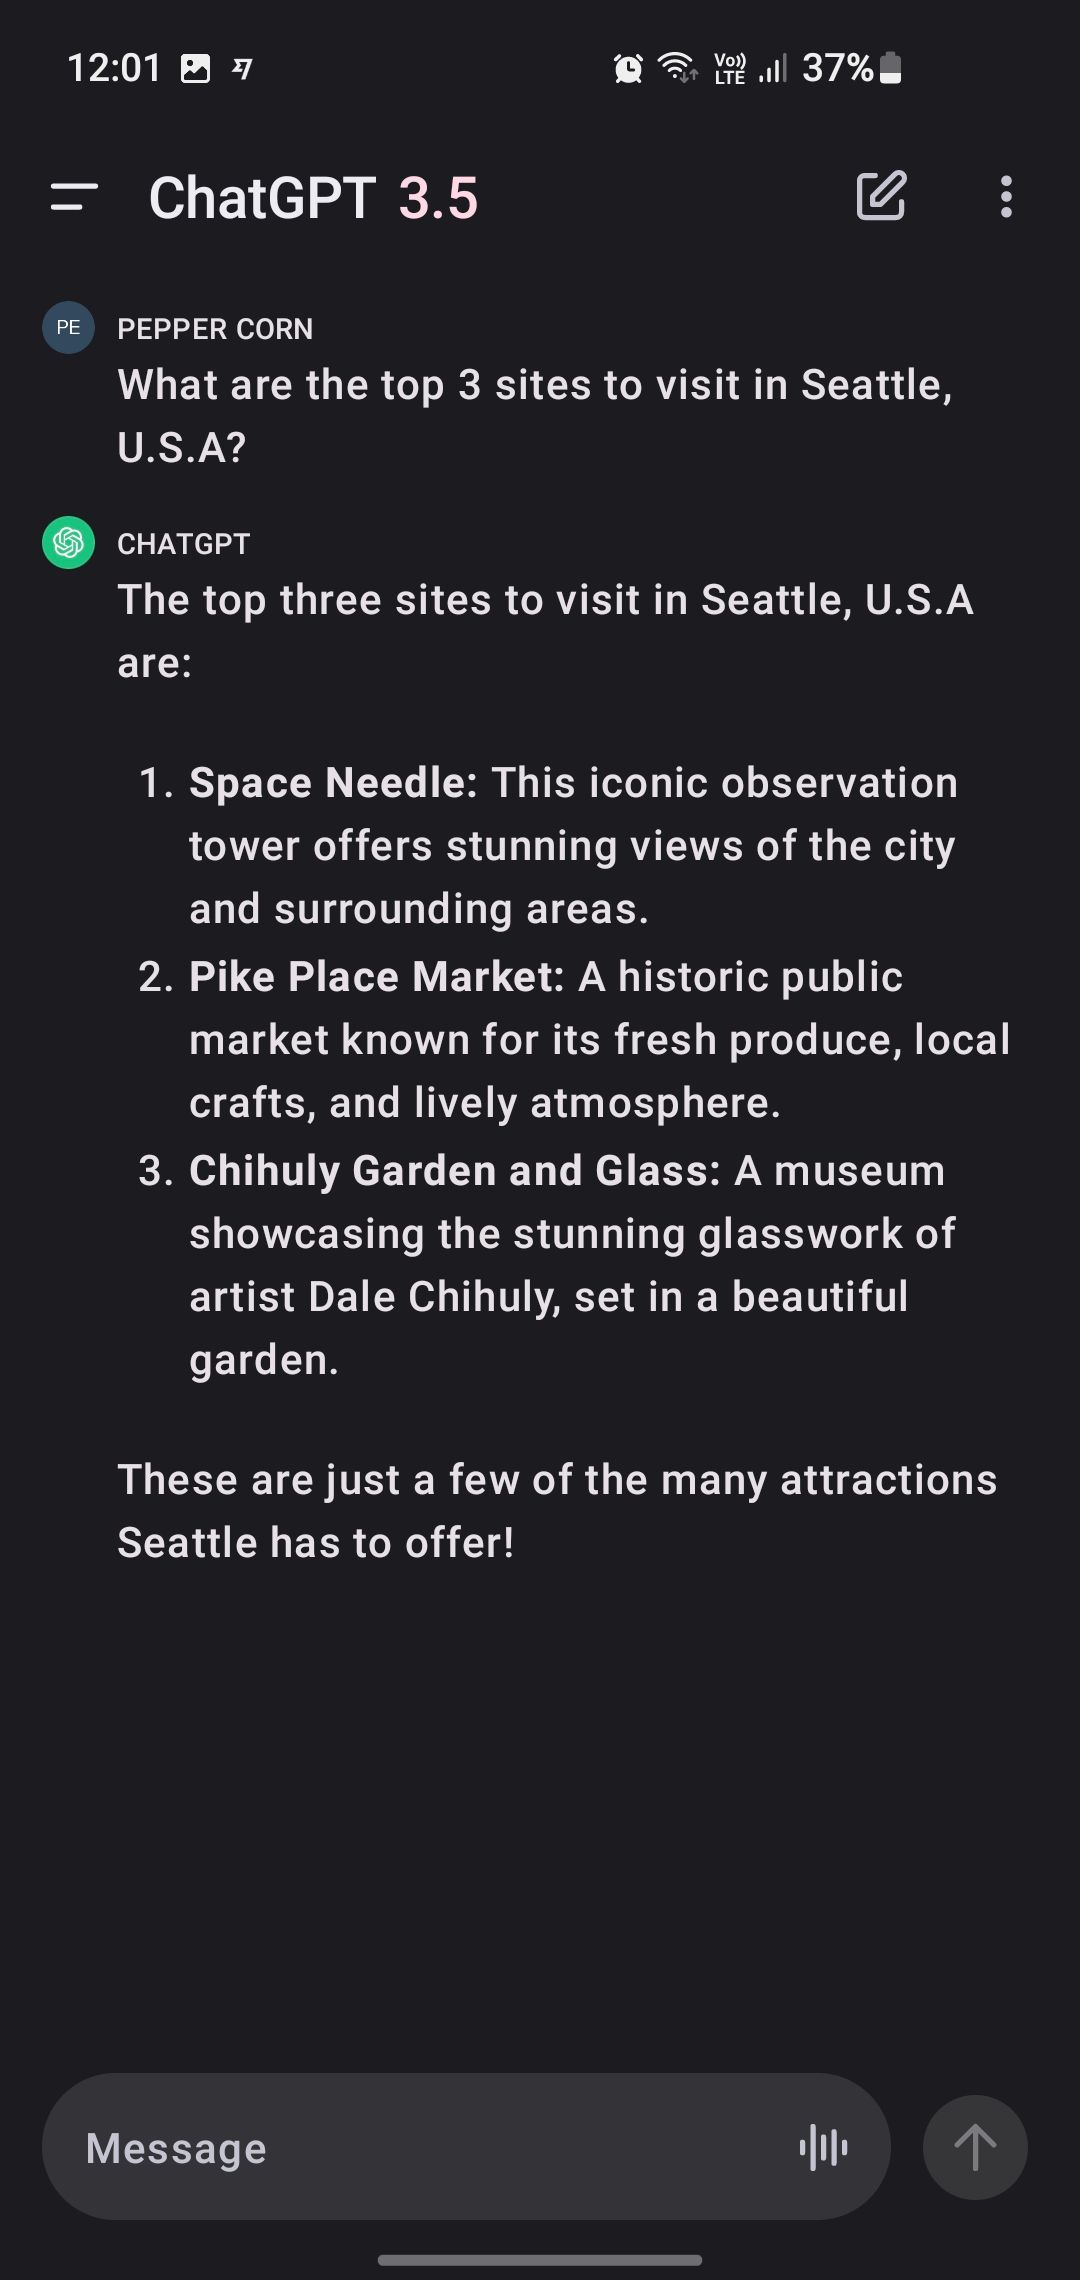 ChatGPT lists attractions in Seattle